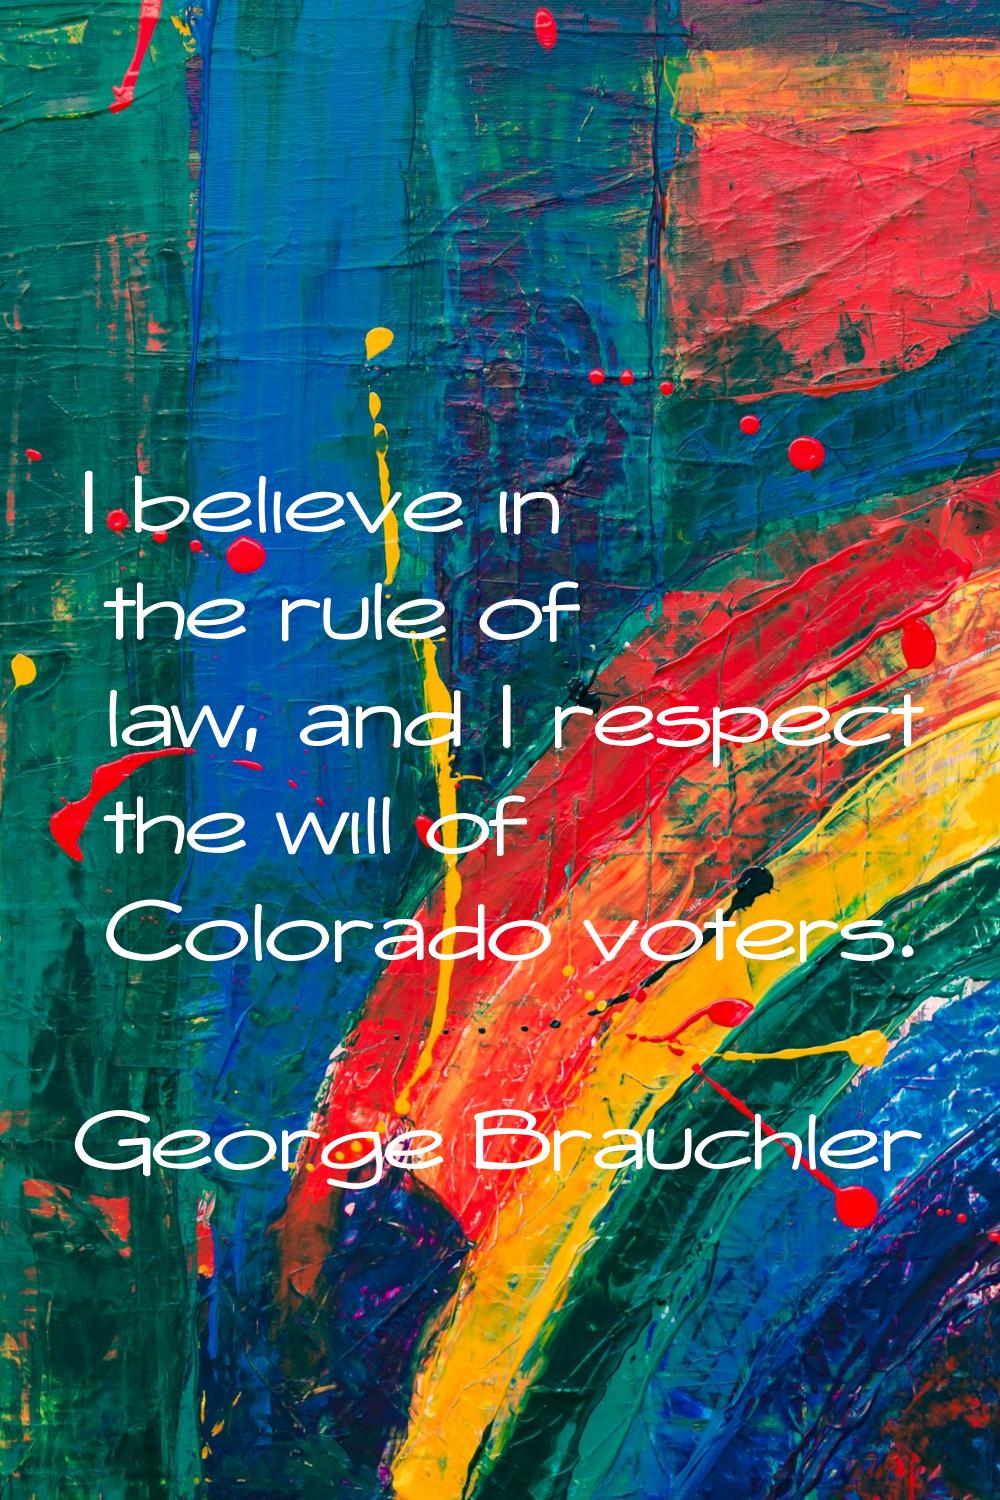 I believe in the rule of law, and I respect the will of Colorado voters.